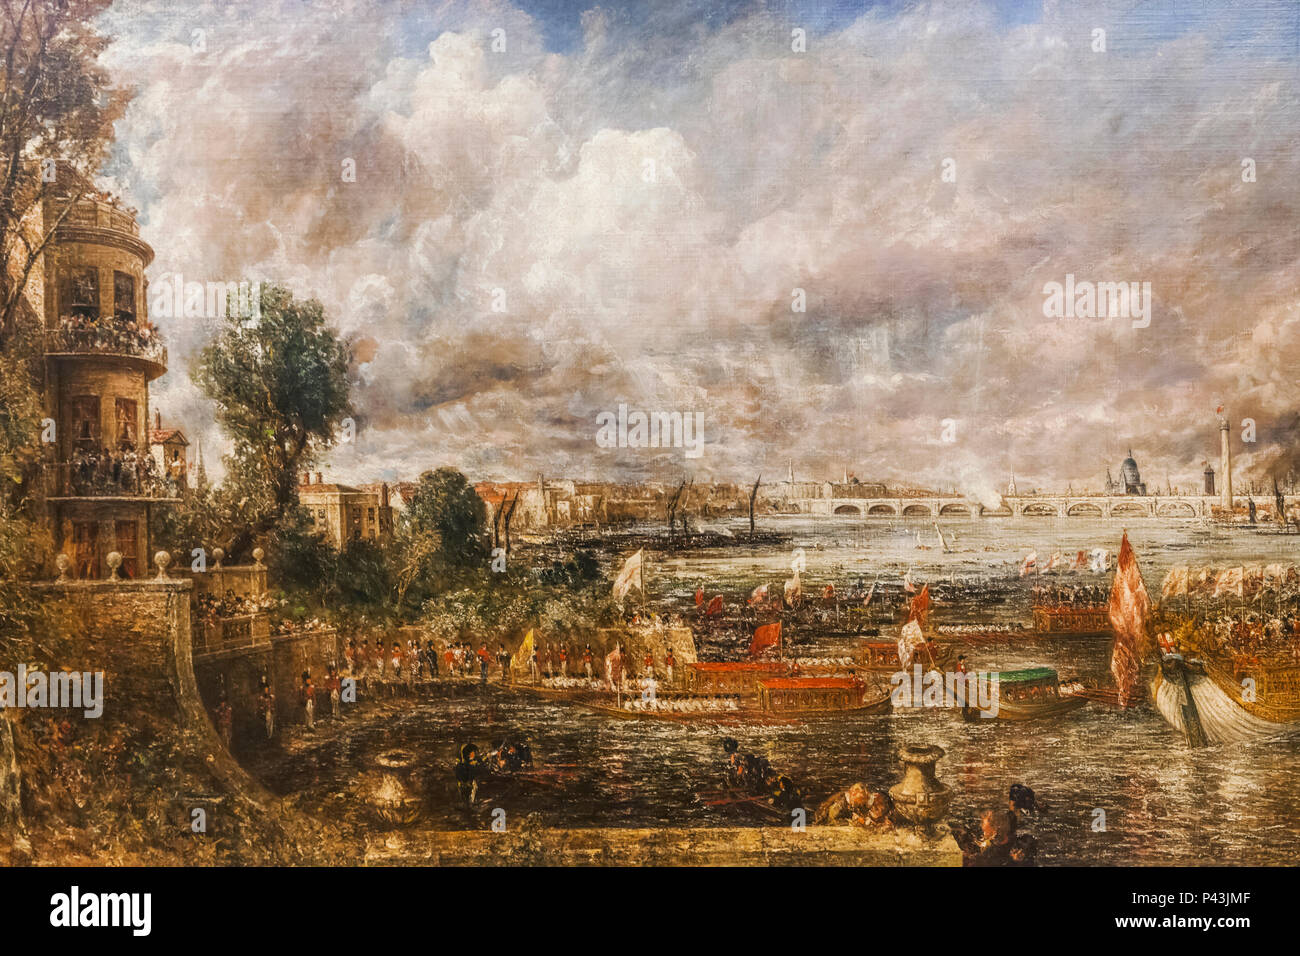 Painting titled 'The Opening of Waterloo Bridge(Whitehall Stairs, June 18th 1817)' by John Constable Stock Photo